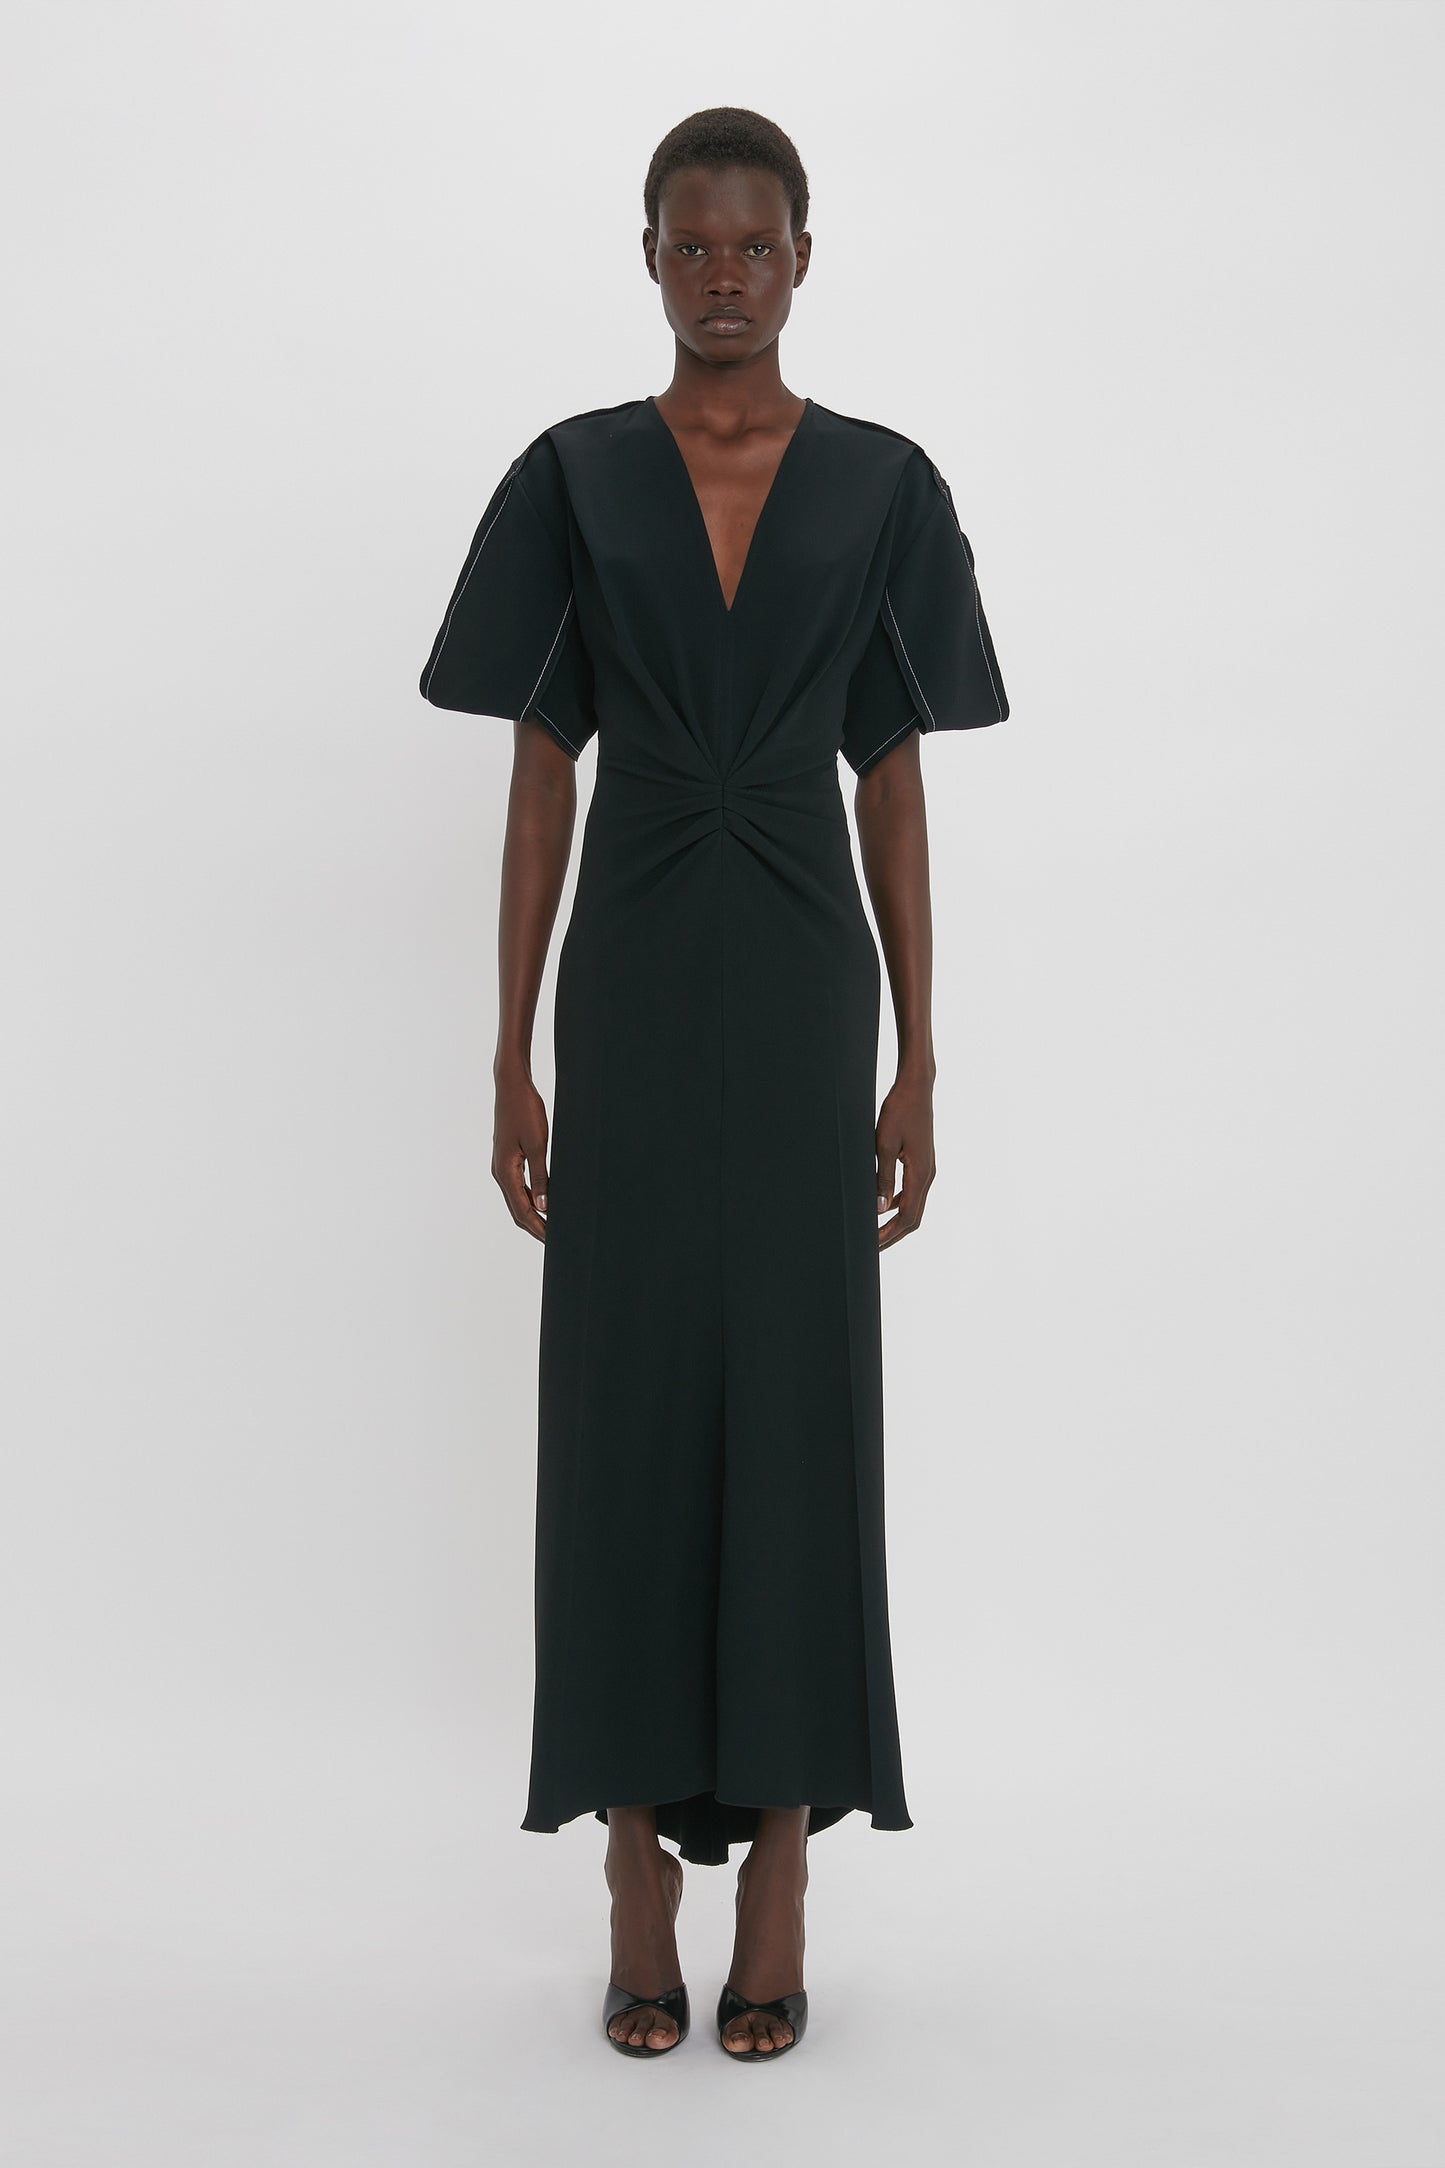 A person stands in a long, black Gathered V-Neck Midi Dress in Black by Victoria Beckham with short sleeves and a deep V-neck, made from figure-flattering stretch fabric, against a plain white background. They wear black high-heeled sandals, adding a contemporary edge to the look.